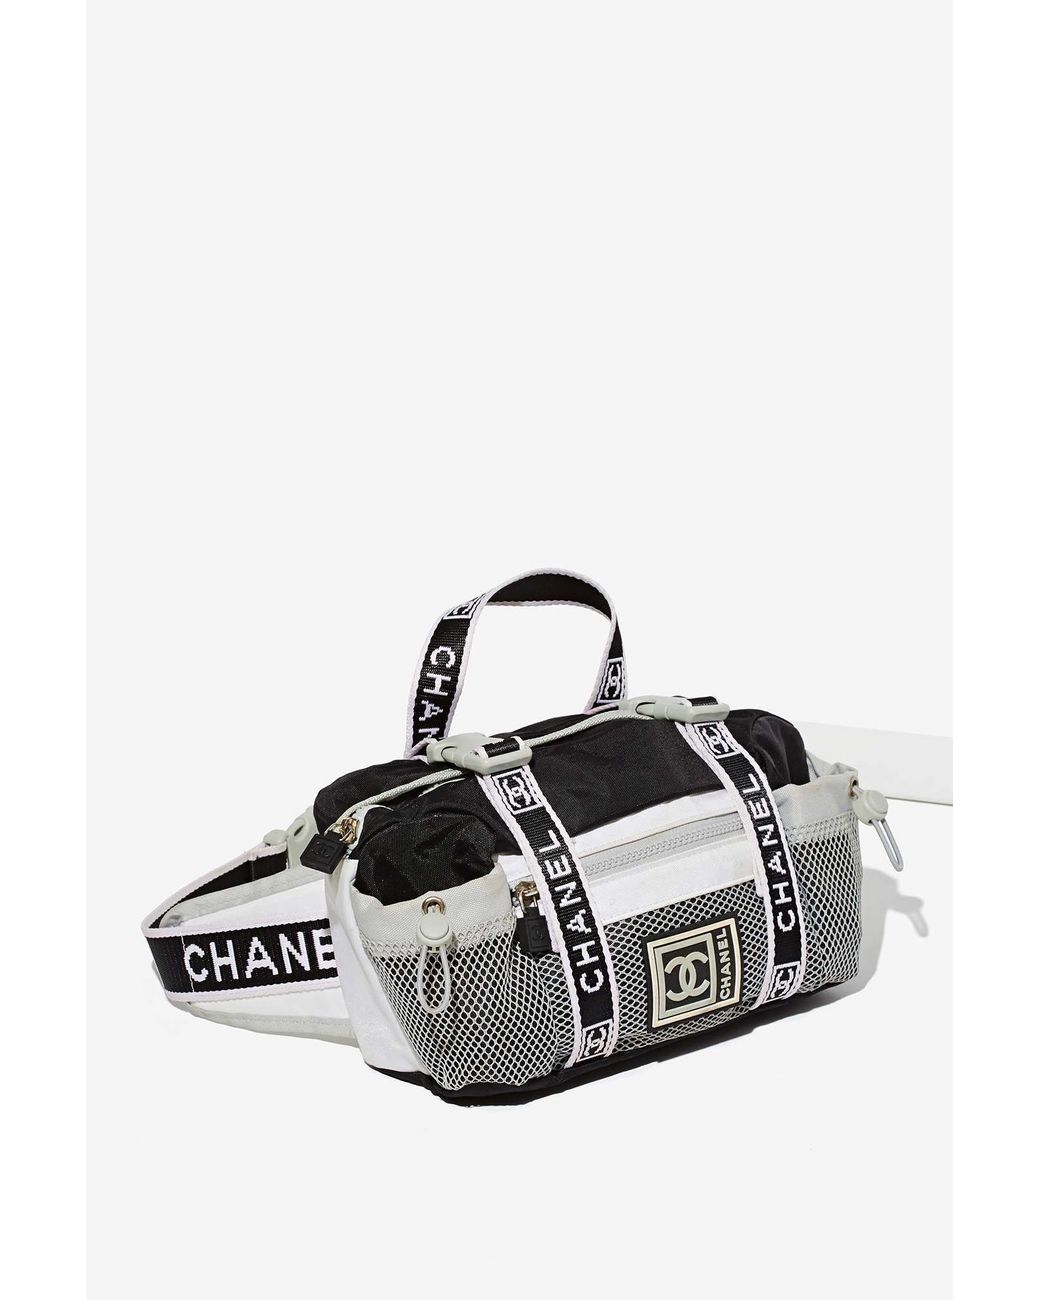 Preowned Chanel Sport Mini Duffel Bag 545  liked on Polyvore featuring  bags luggage chanel and black  Chanel luggage Chanel 3 Duffel